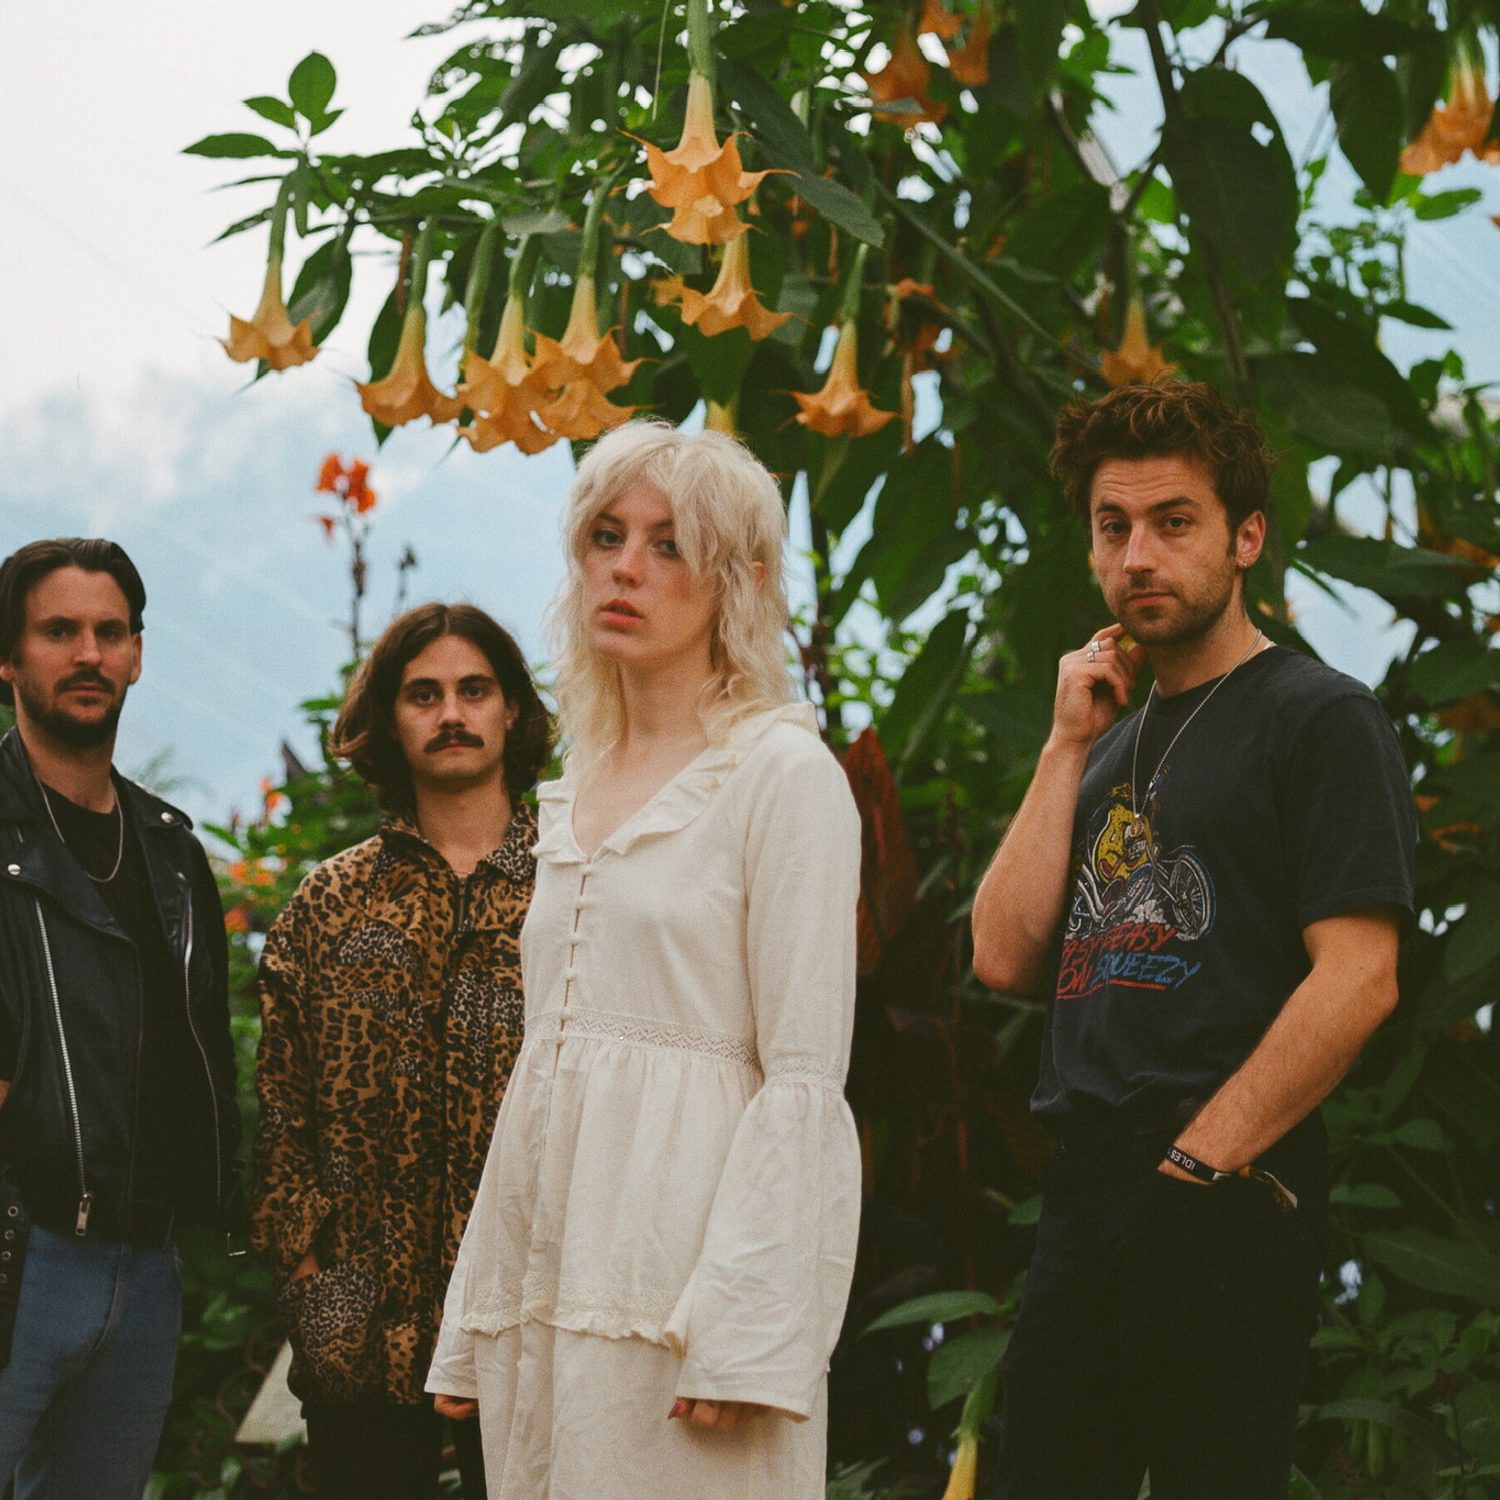 Black Honey's Izzy B Phillips on covering 'Wild Thing', playing NOS Alive Festival, and European tour antics